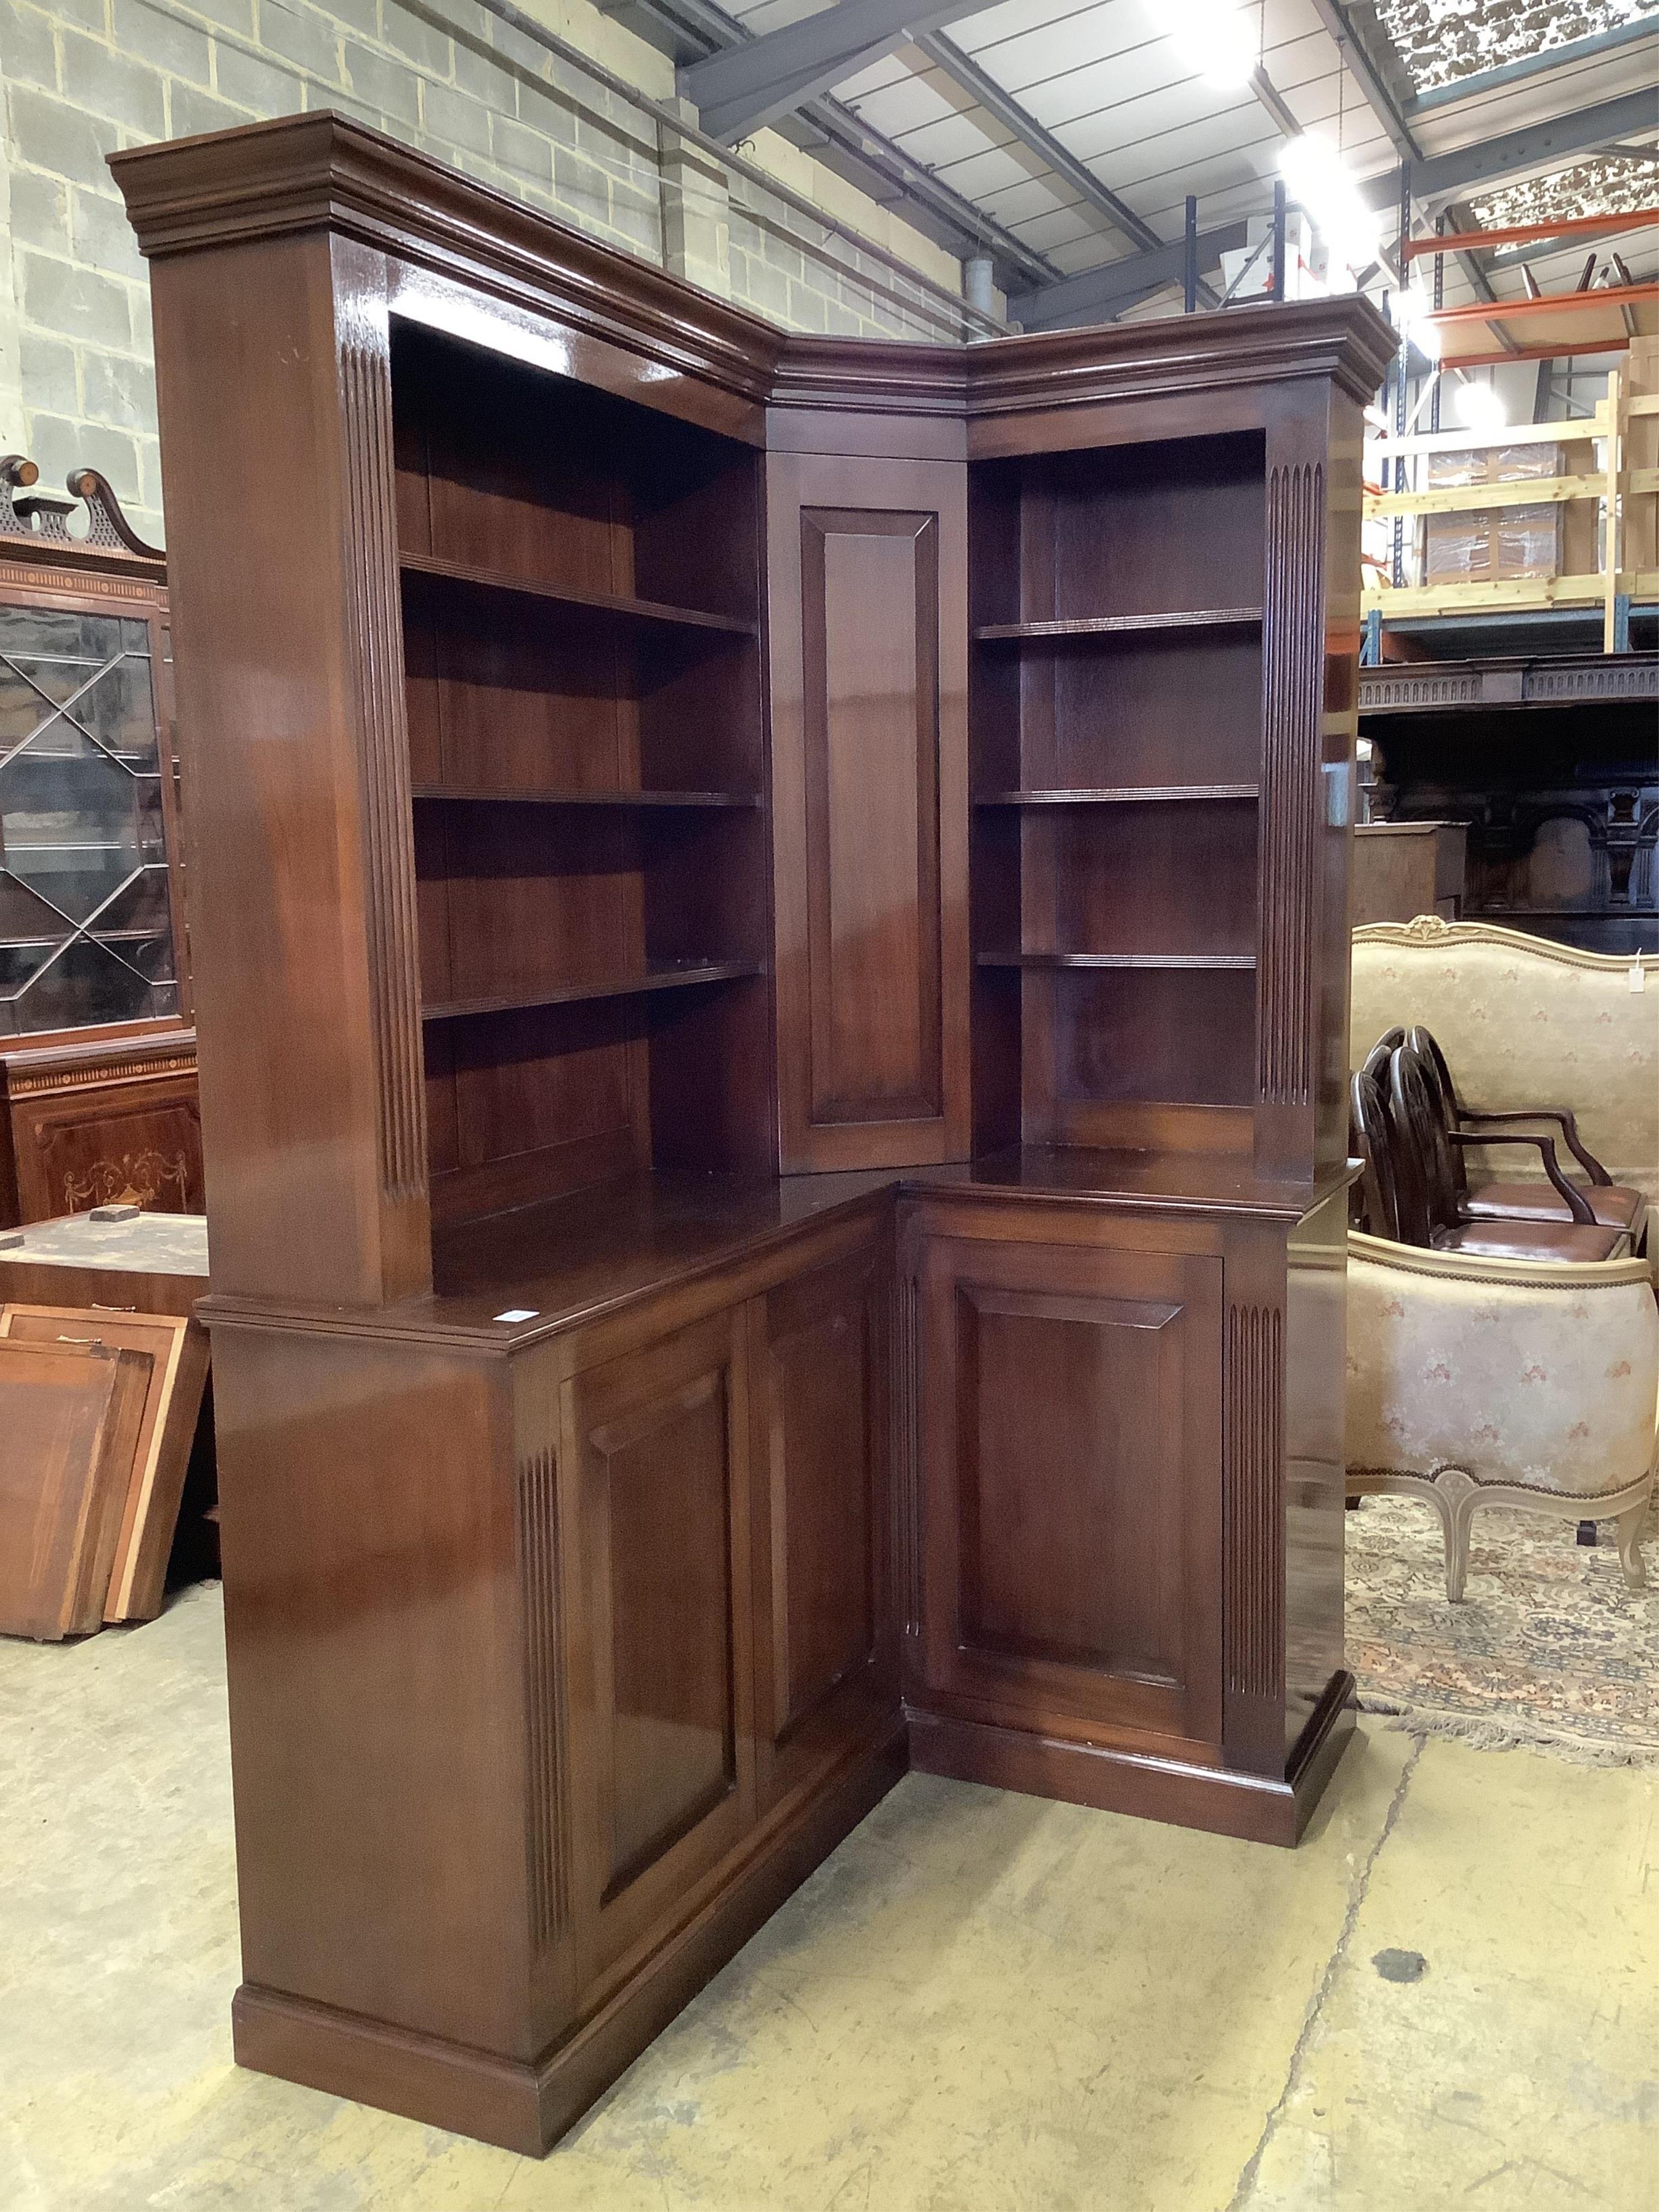 A George III style mahogany corner library bookcase, the mid section incorporating a secret cupboard, width 142cm, depth 102cm, height 213cm. Condition - good